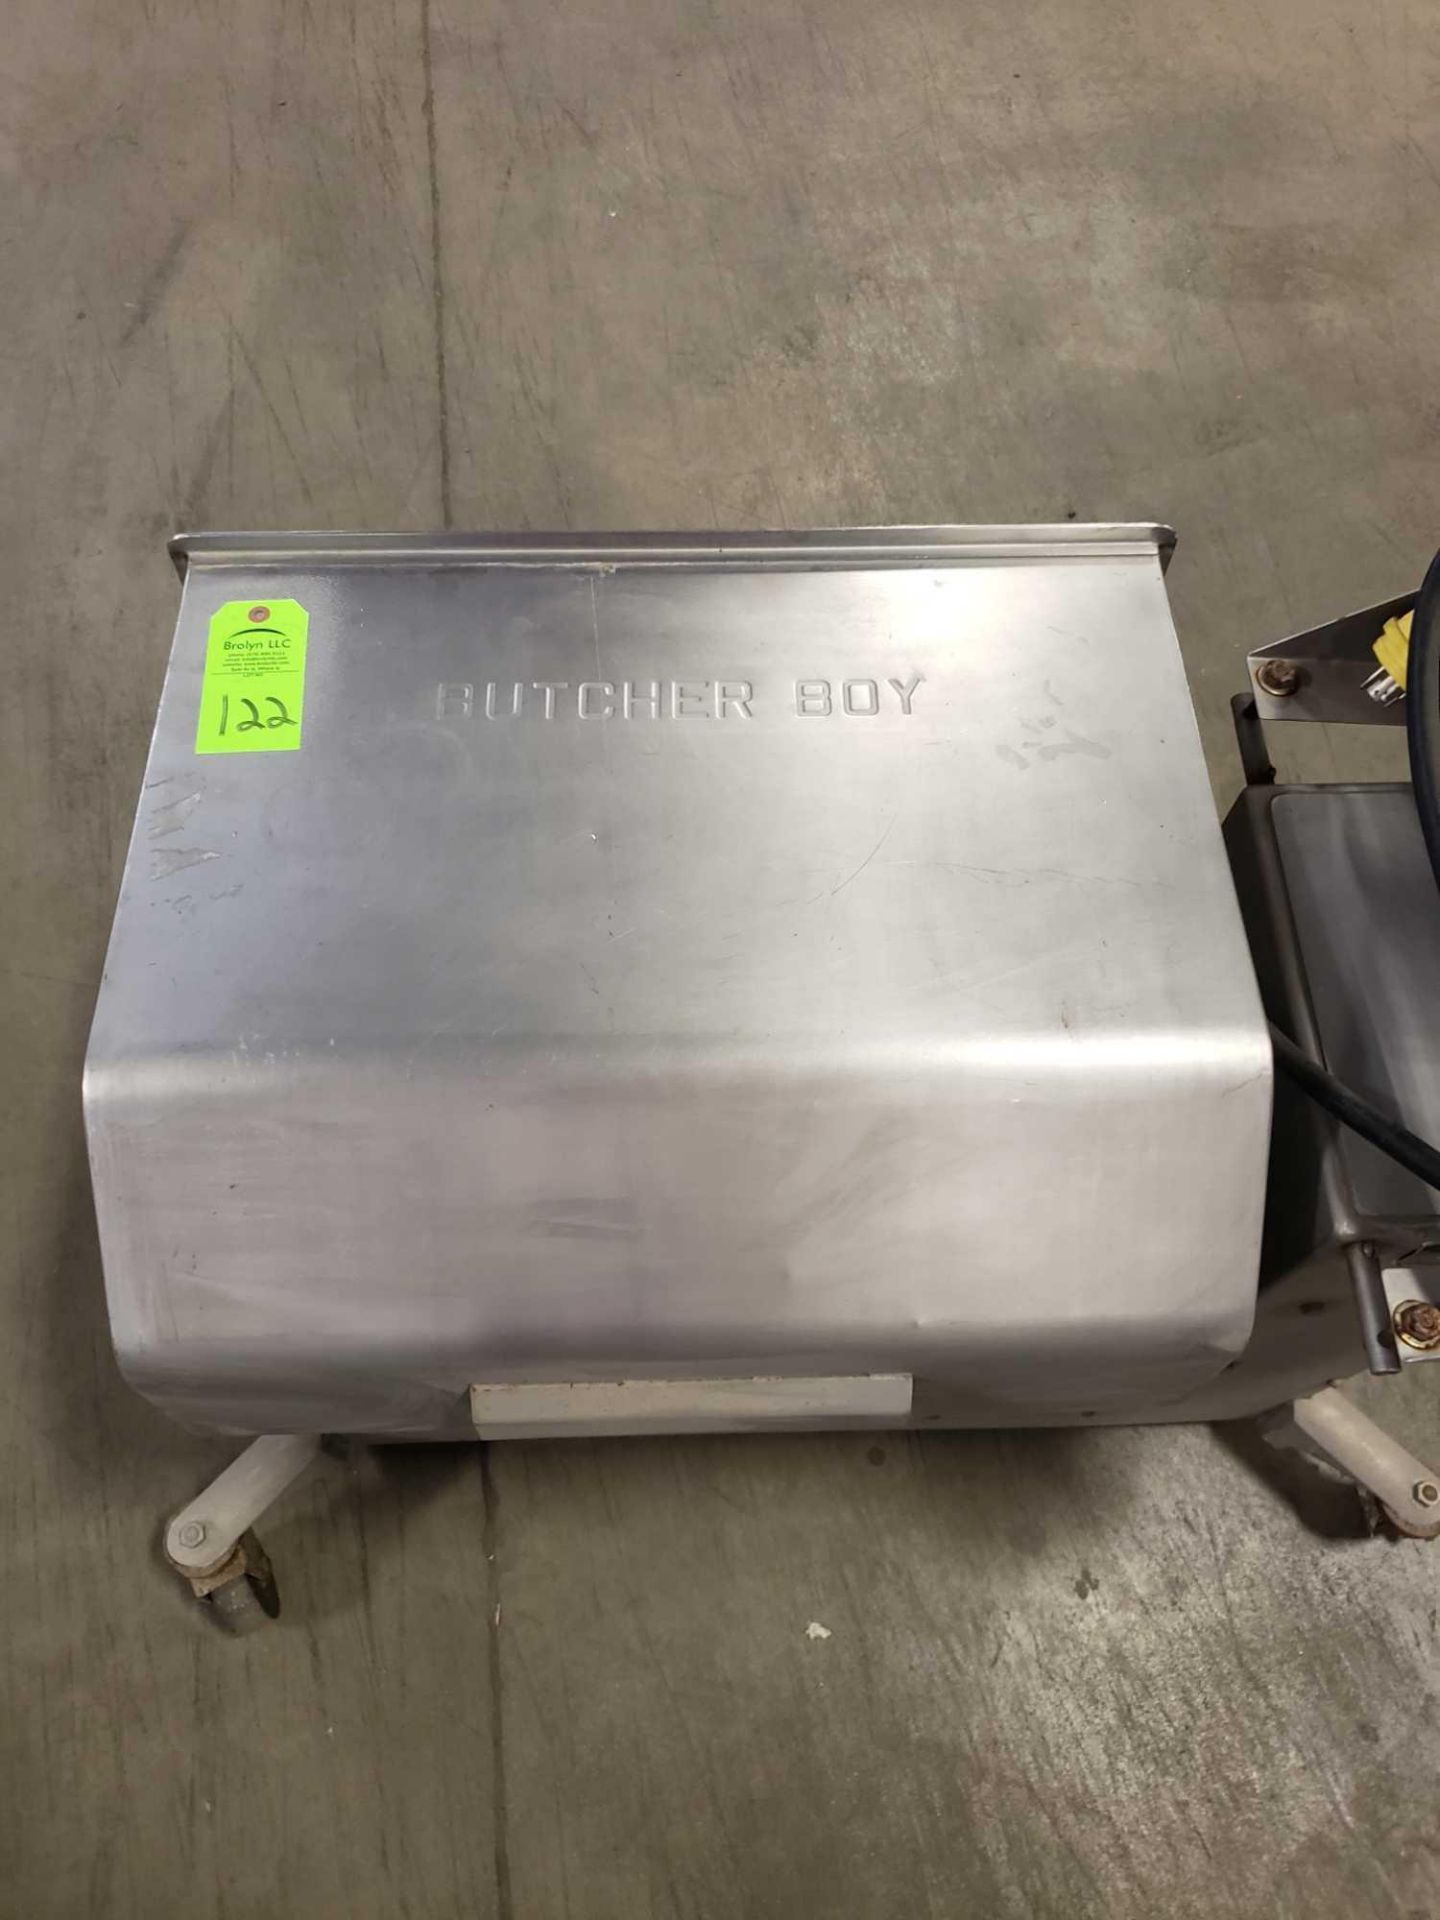 Butch Boy Model 150F meat mixer. 1hp, 3 phase, 230v. - Image 3 of 8